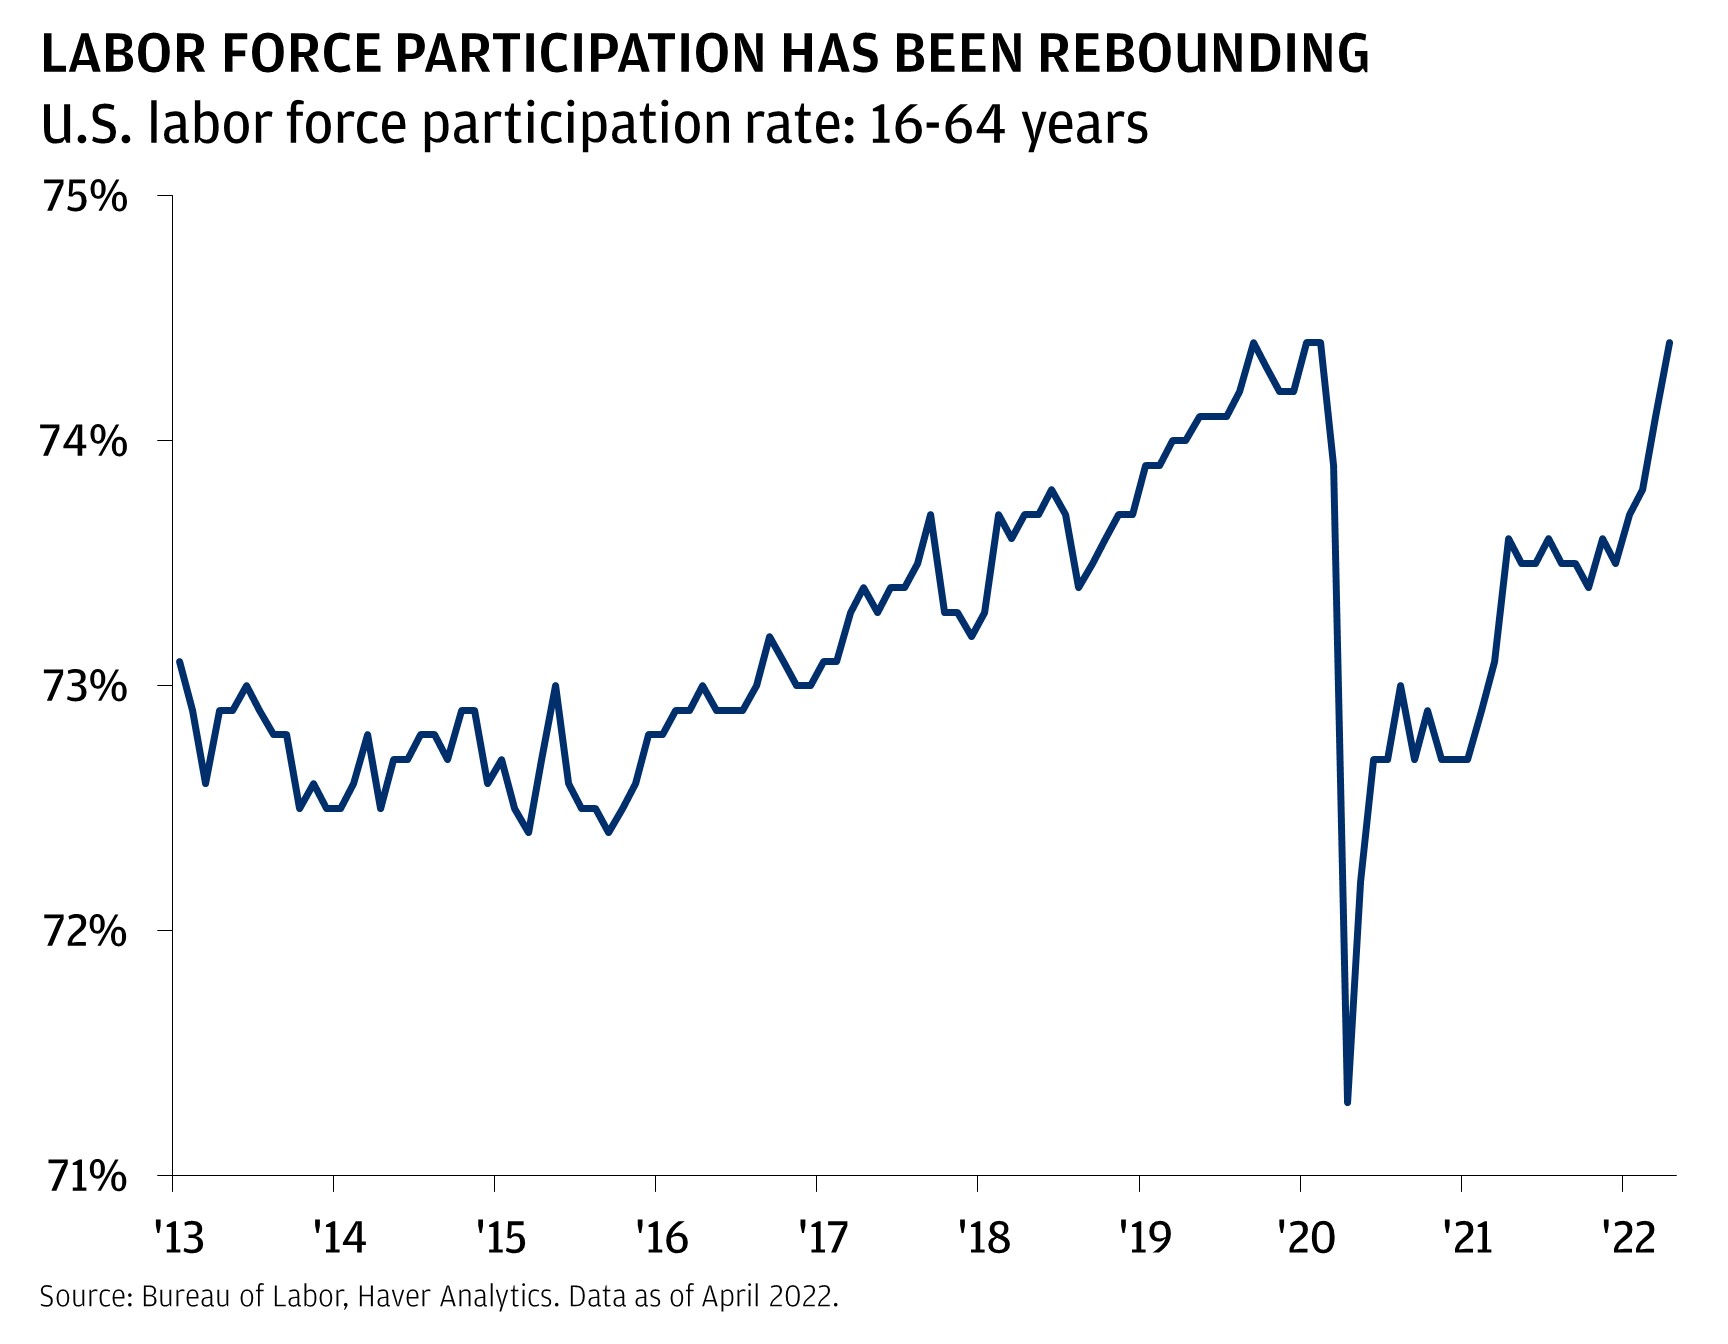 This chart shows the U.S. labor force participation rate: 16-64 years, from January 2013 until April 2022.